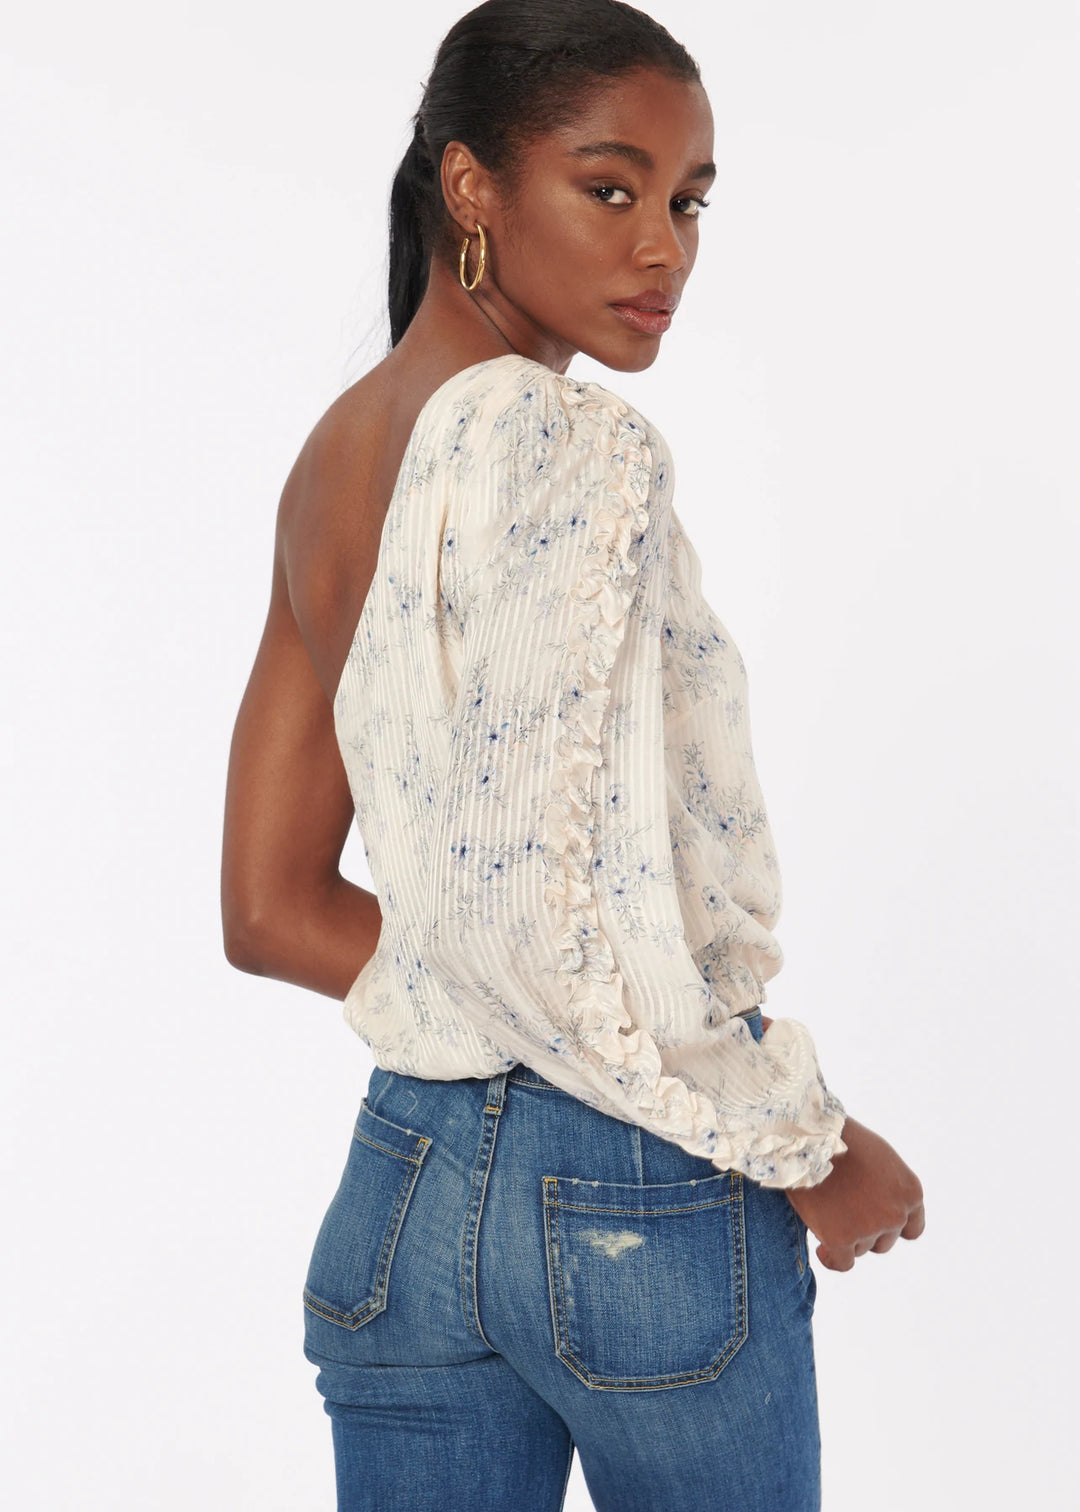 Cami NYC - Lotus Top in Forget Me Not